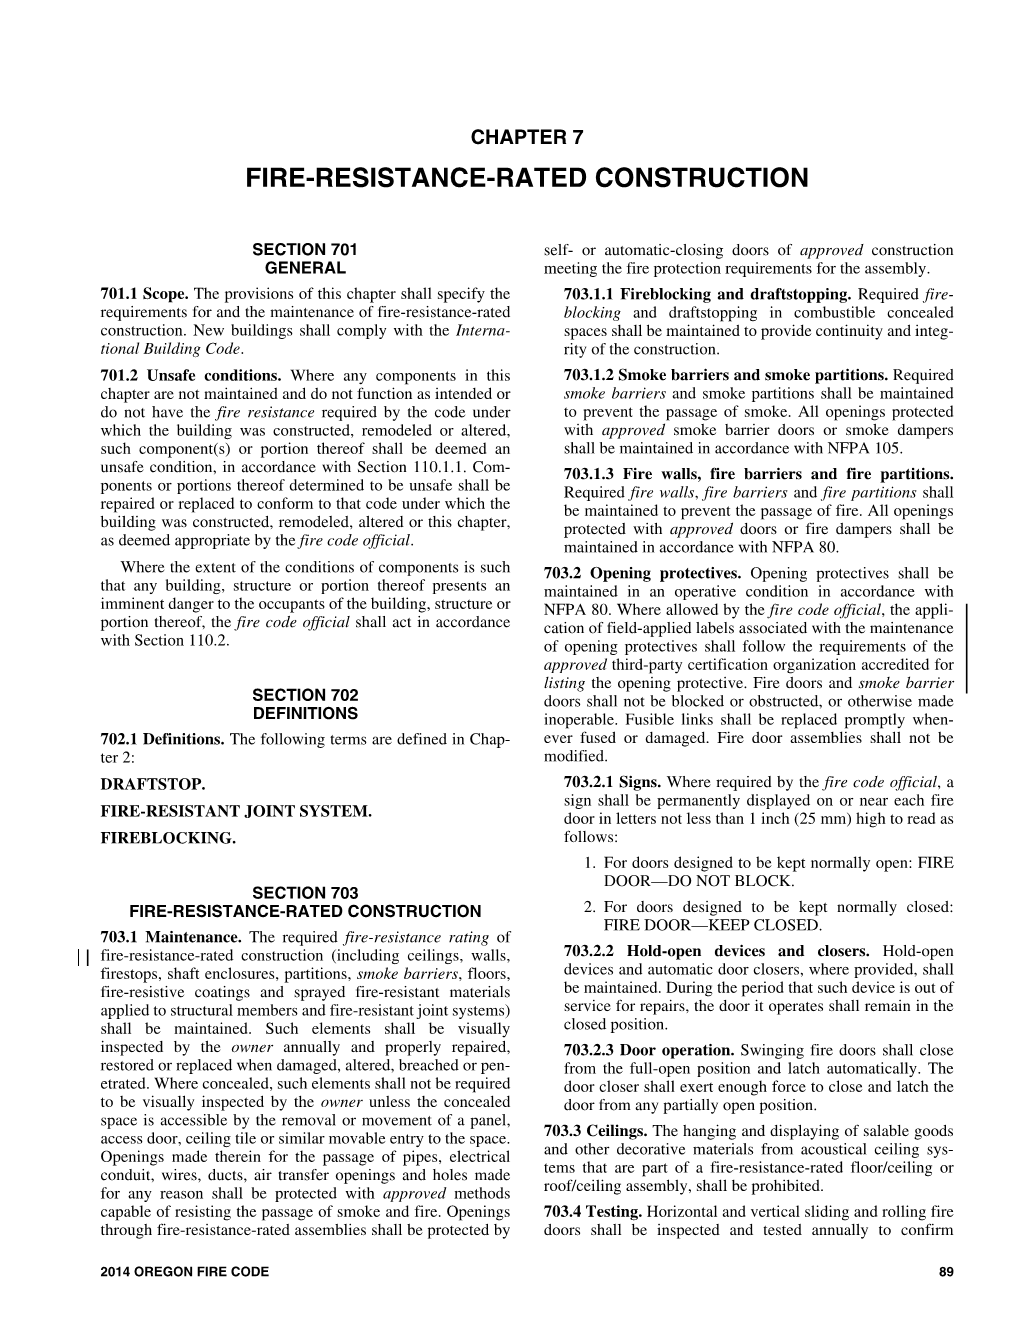 Fire-Resistance-Rated Construction